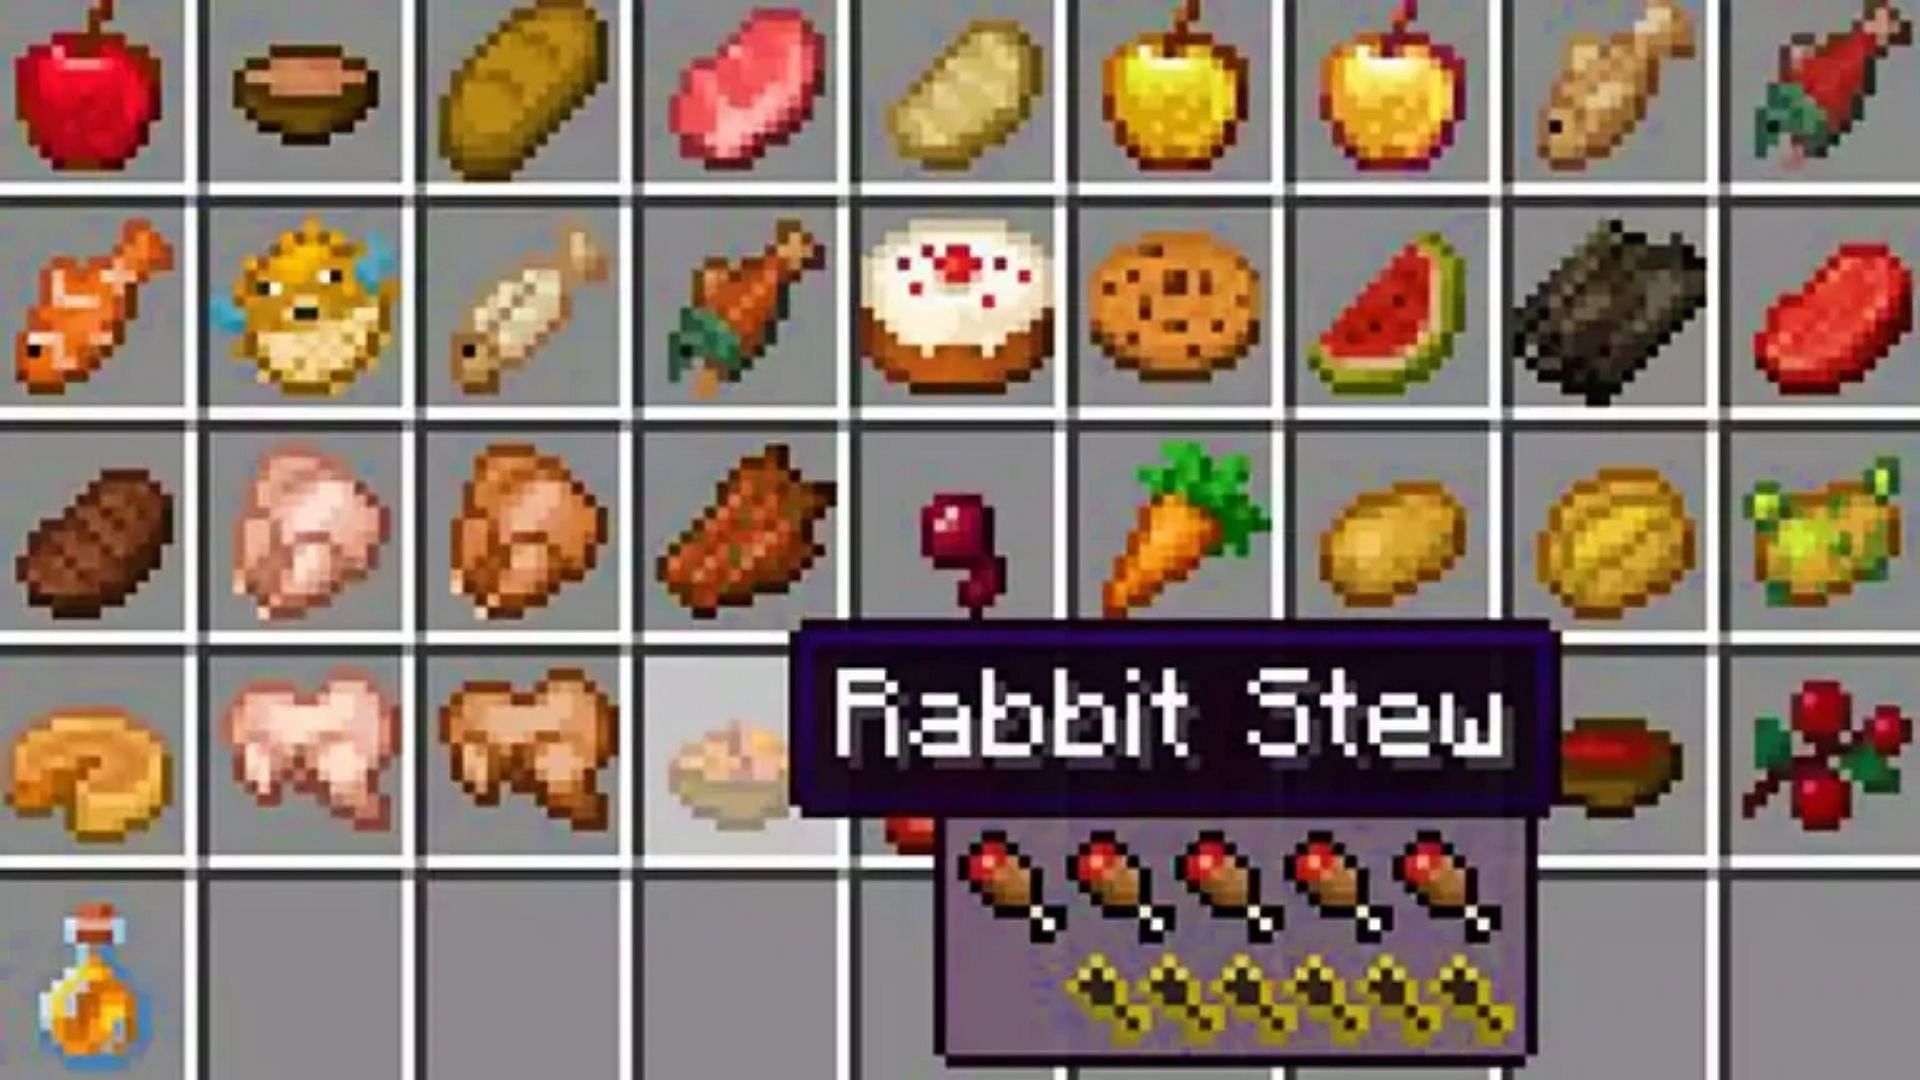 Food items can show more information to help players eat better in the game (Image via Mojang)